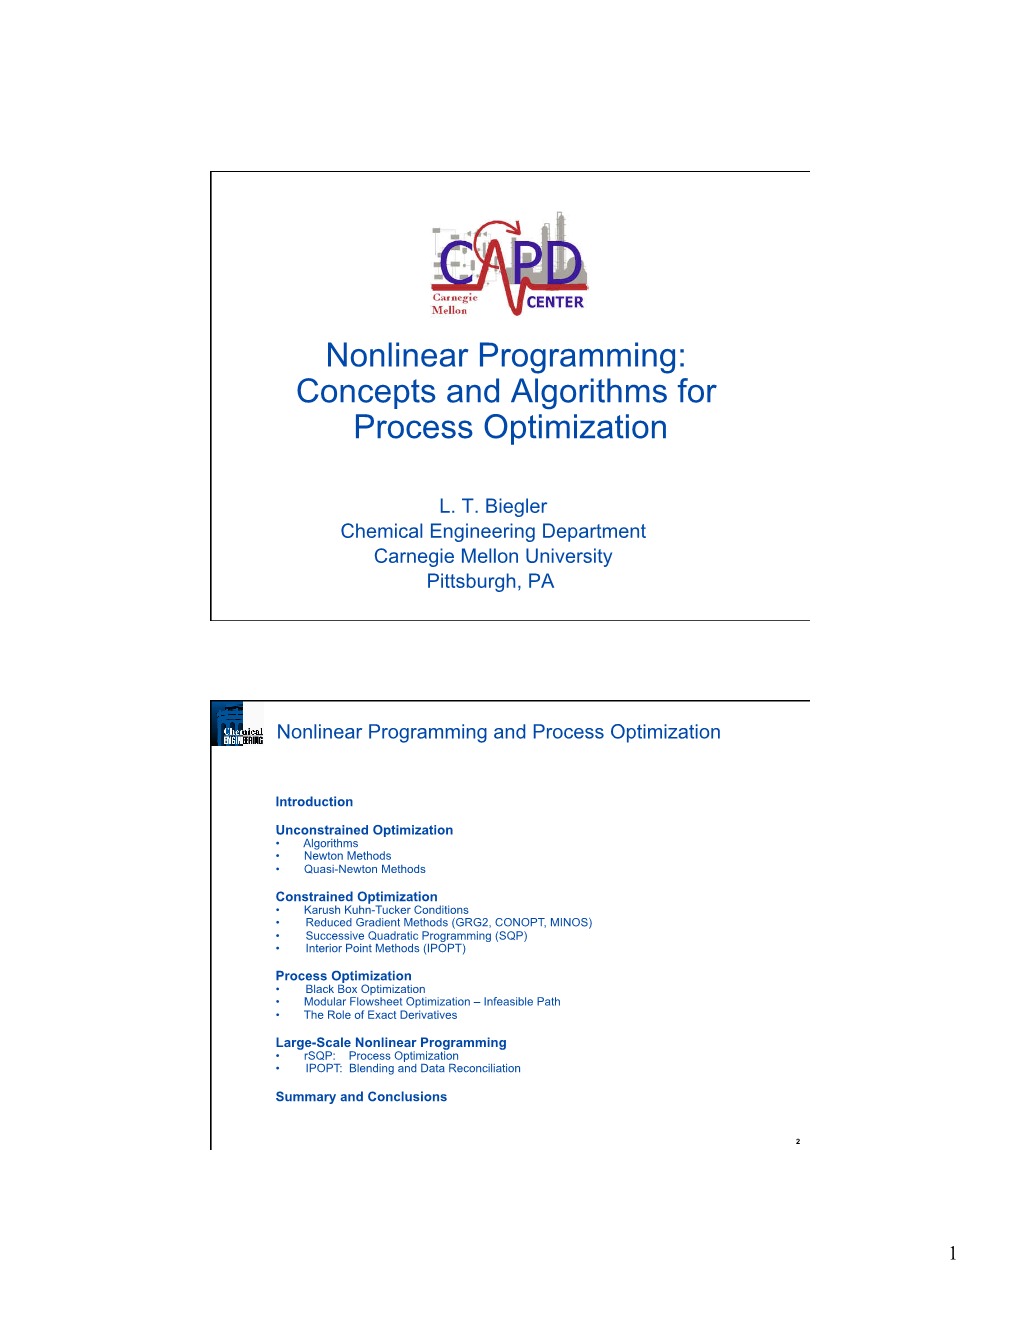 Nonlinear Programming: Concepts and Algorithms for Process Optimization